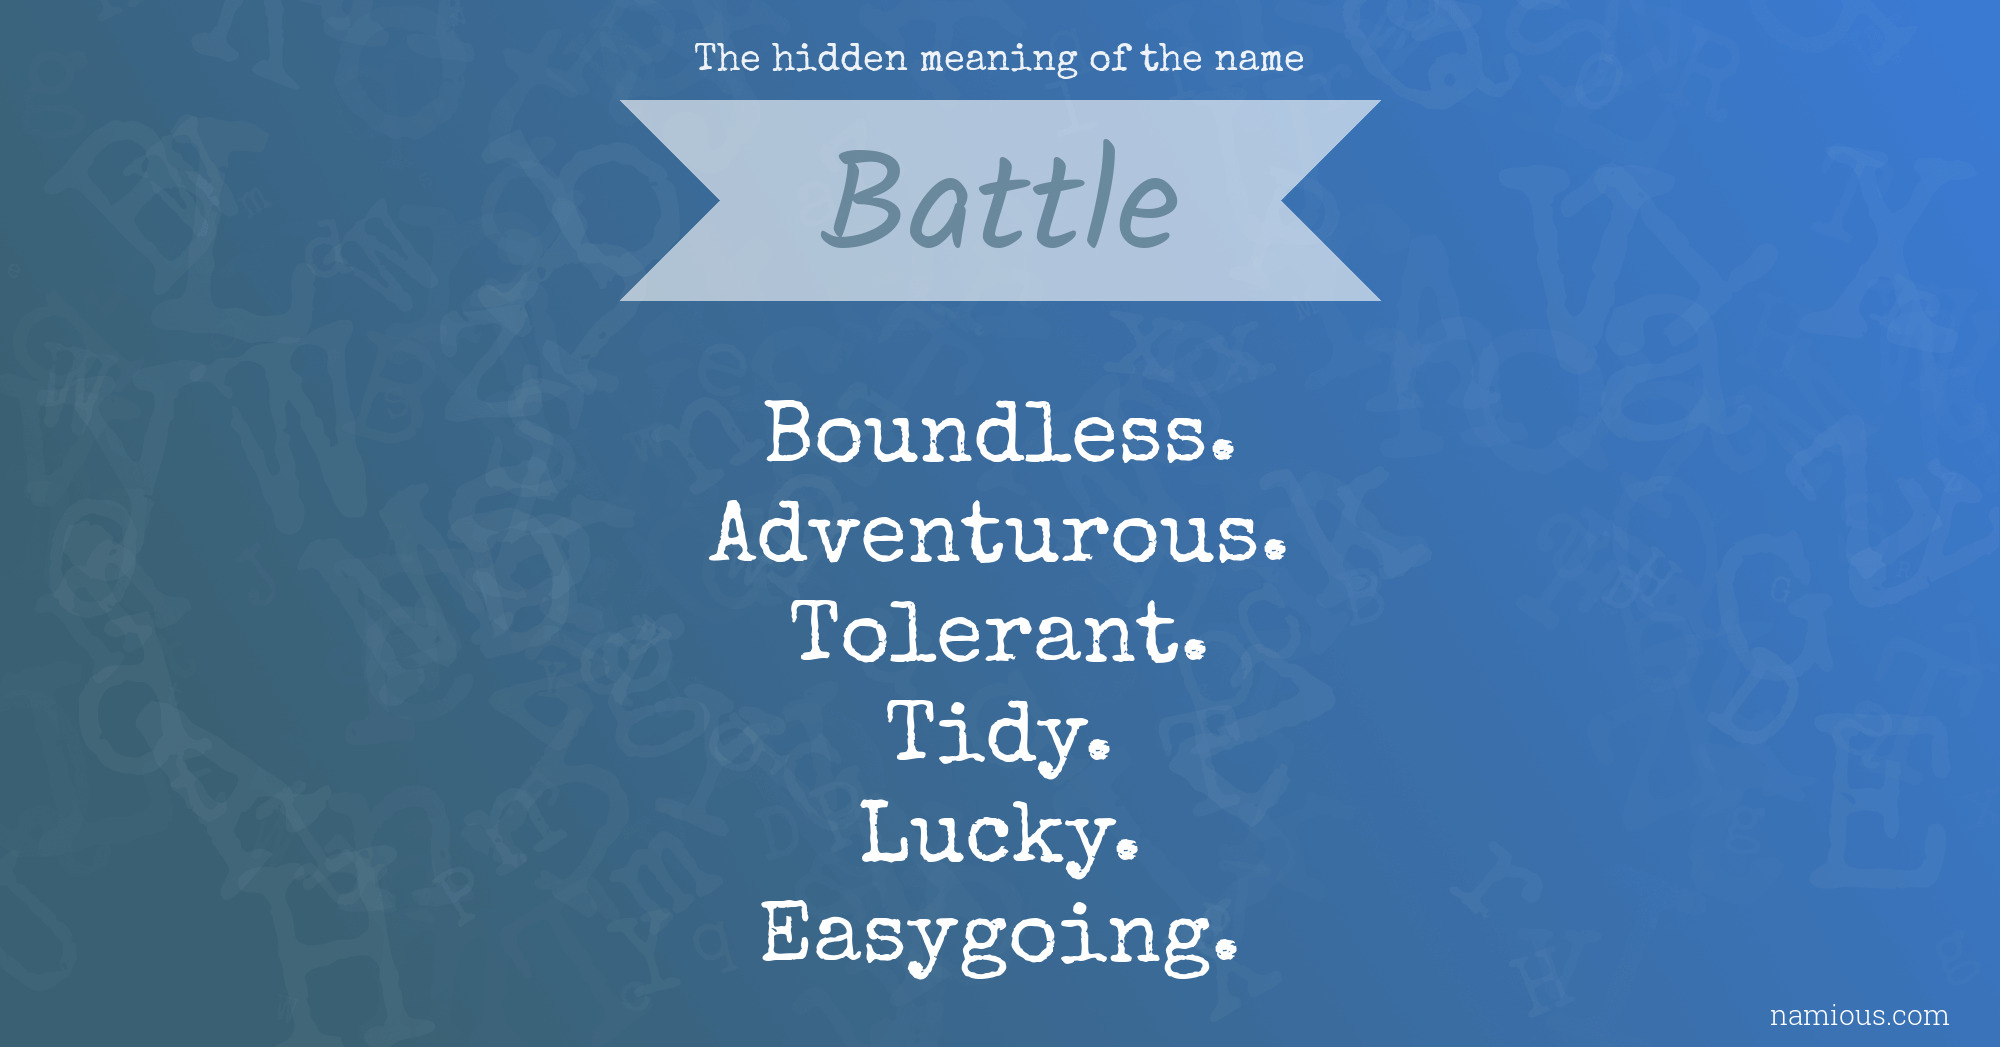 The hidden meaning of the name Battle